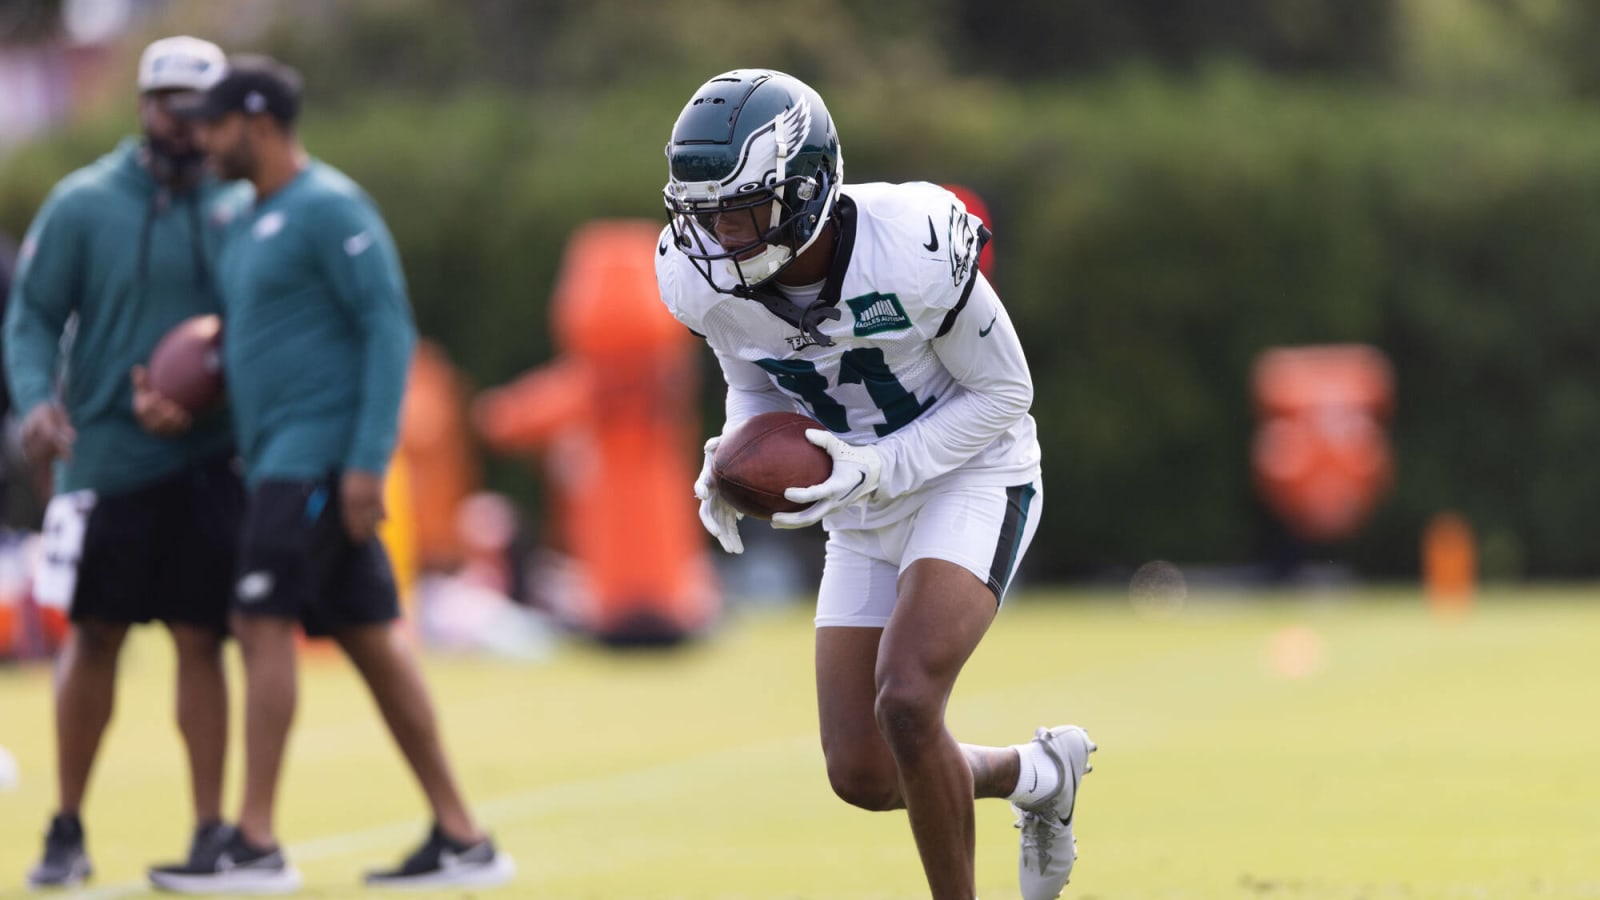 &#39;Oh, Baby!&#39;: Eagles DB&#39;s Journey Ends on Roster